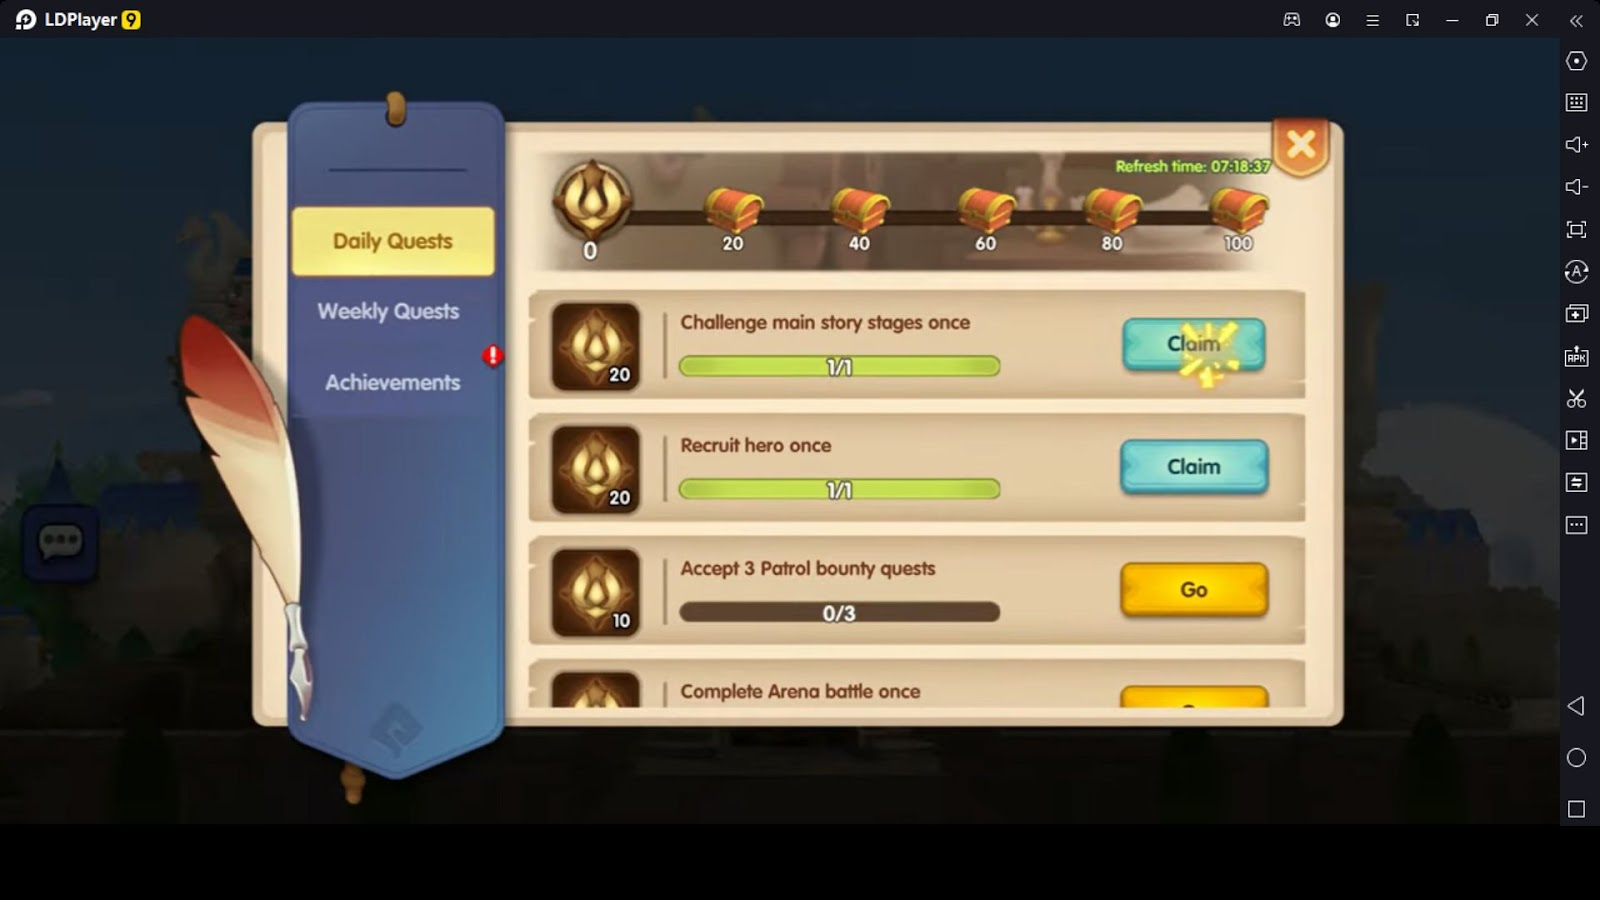 Daily and Weekly Quests with Achievements